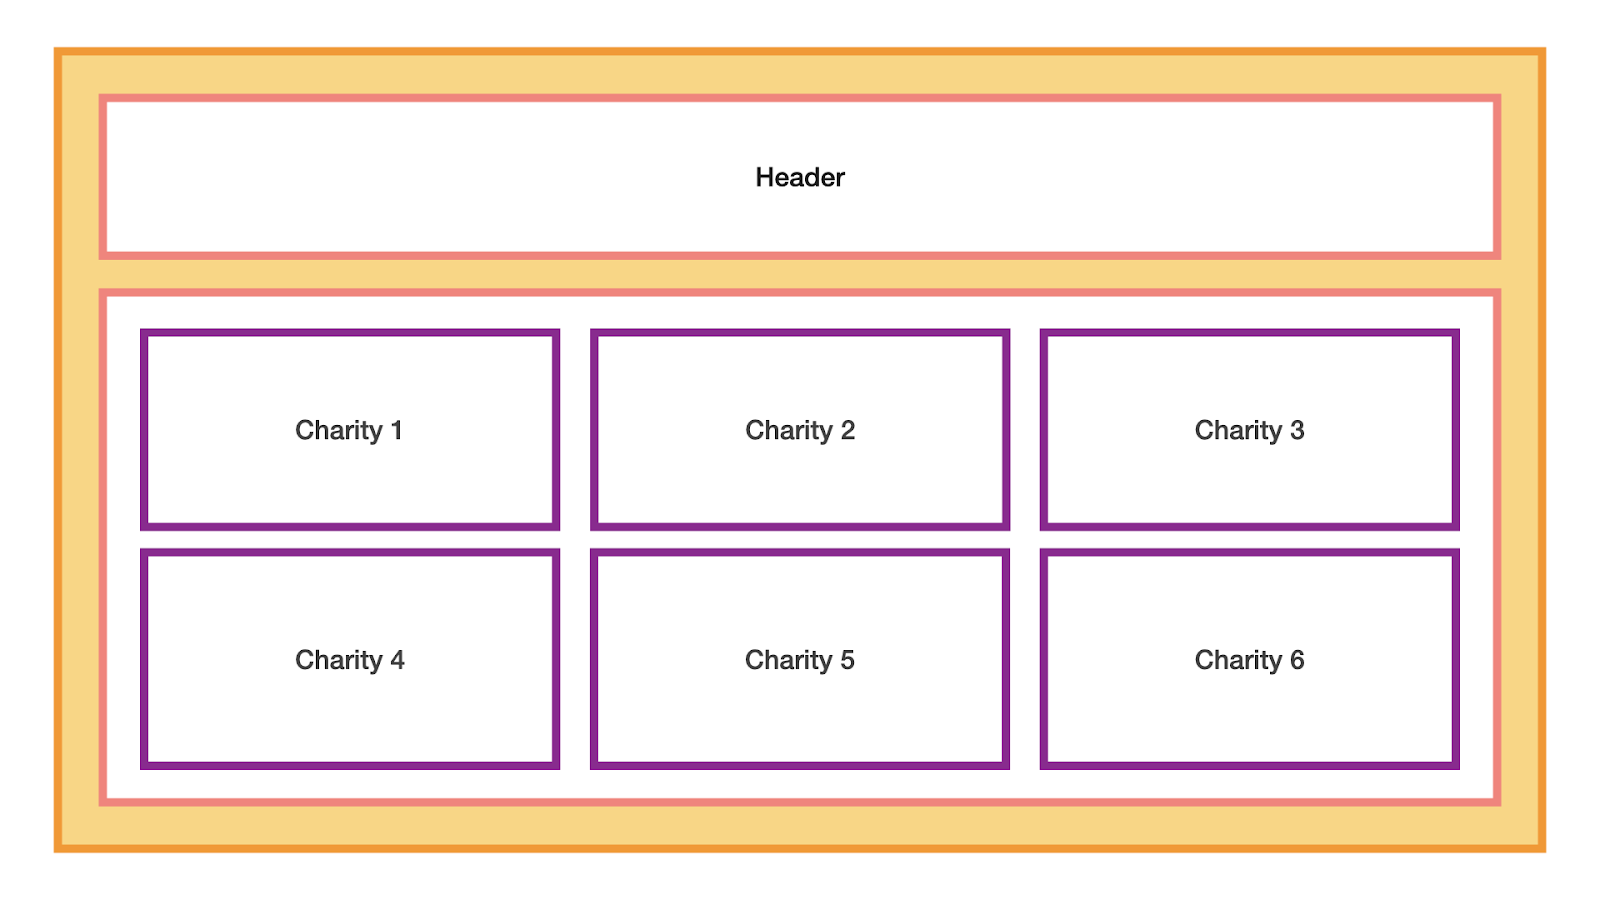 The design layout of the frontend application. A header block spans the entire screen. Below the header is a great of 6 charity blocks, 3 charity blocks per row.